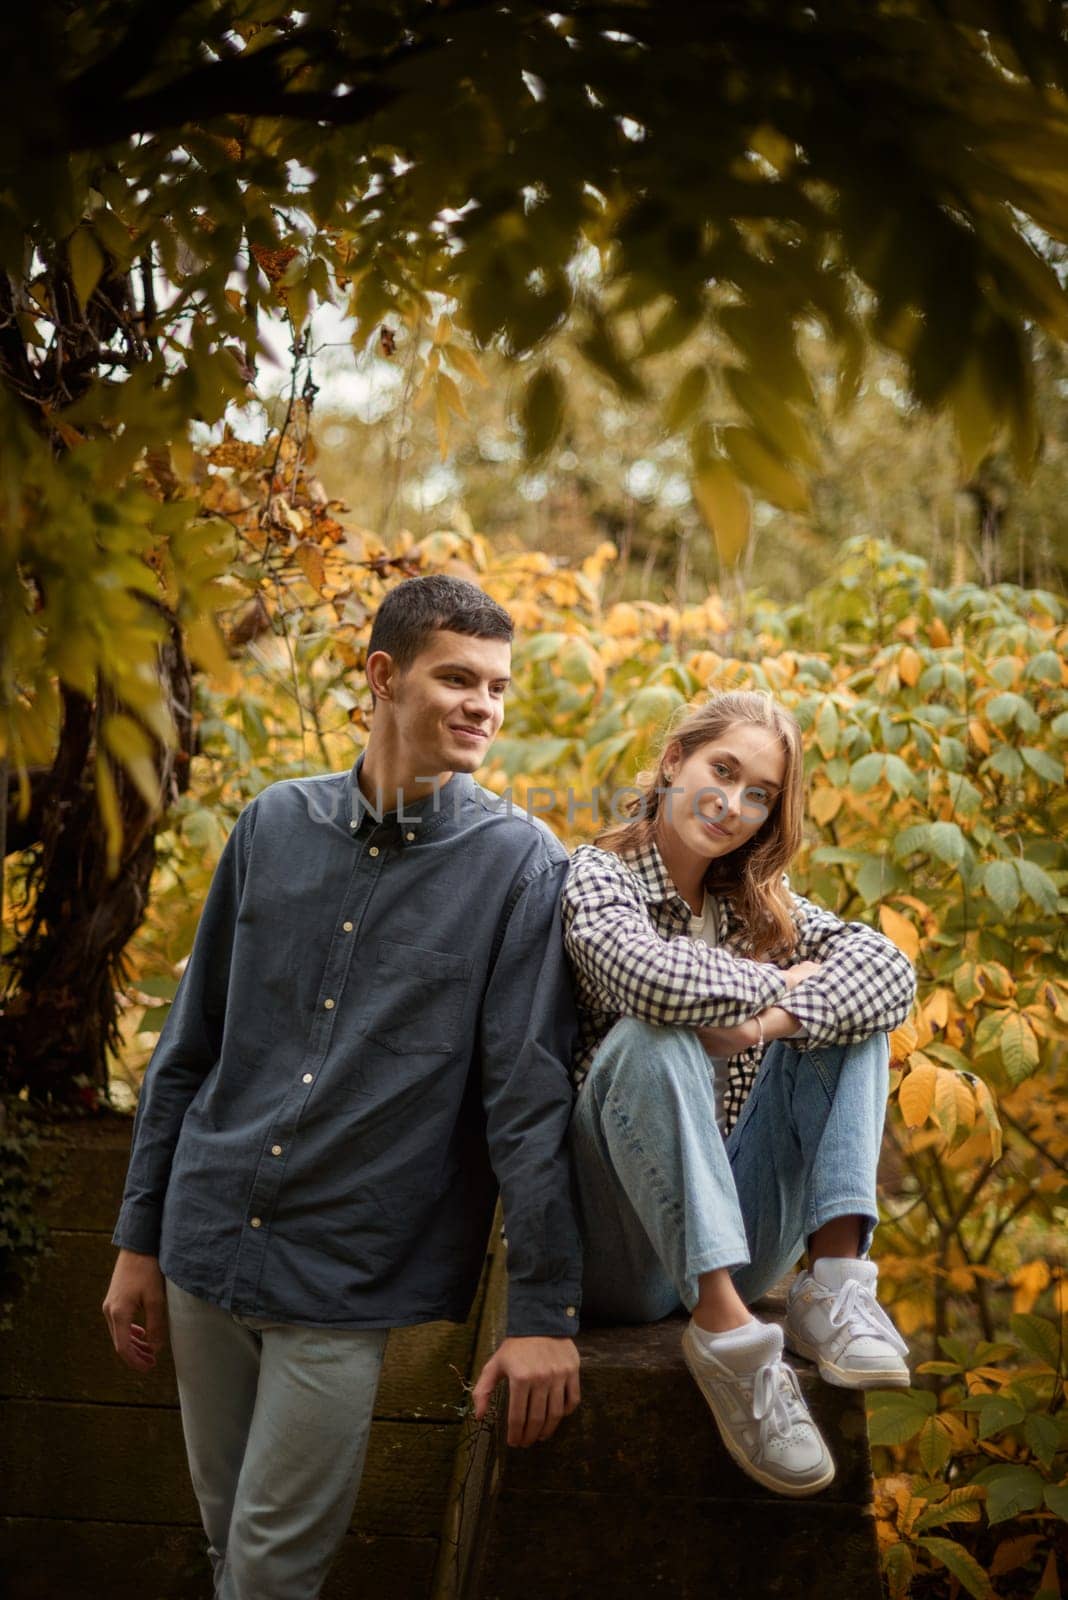 Warm Embrace of Teen Love in the Autumn Park. Capturing Teen Moments: Love Blossoms in Autumn's Embrace. Teenagers in Love: Embracing the Autumn Vibe by Andrii_Ko